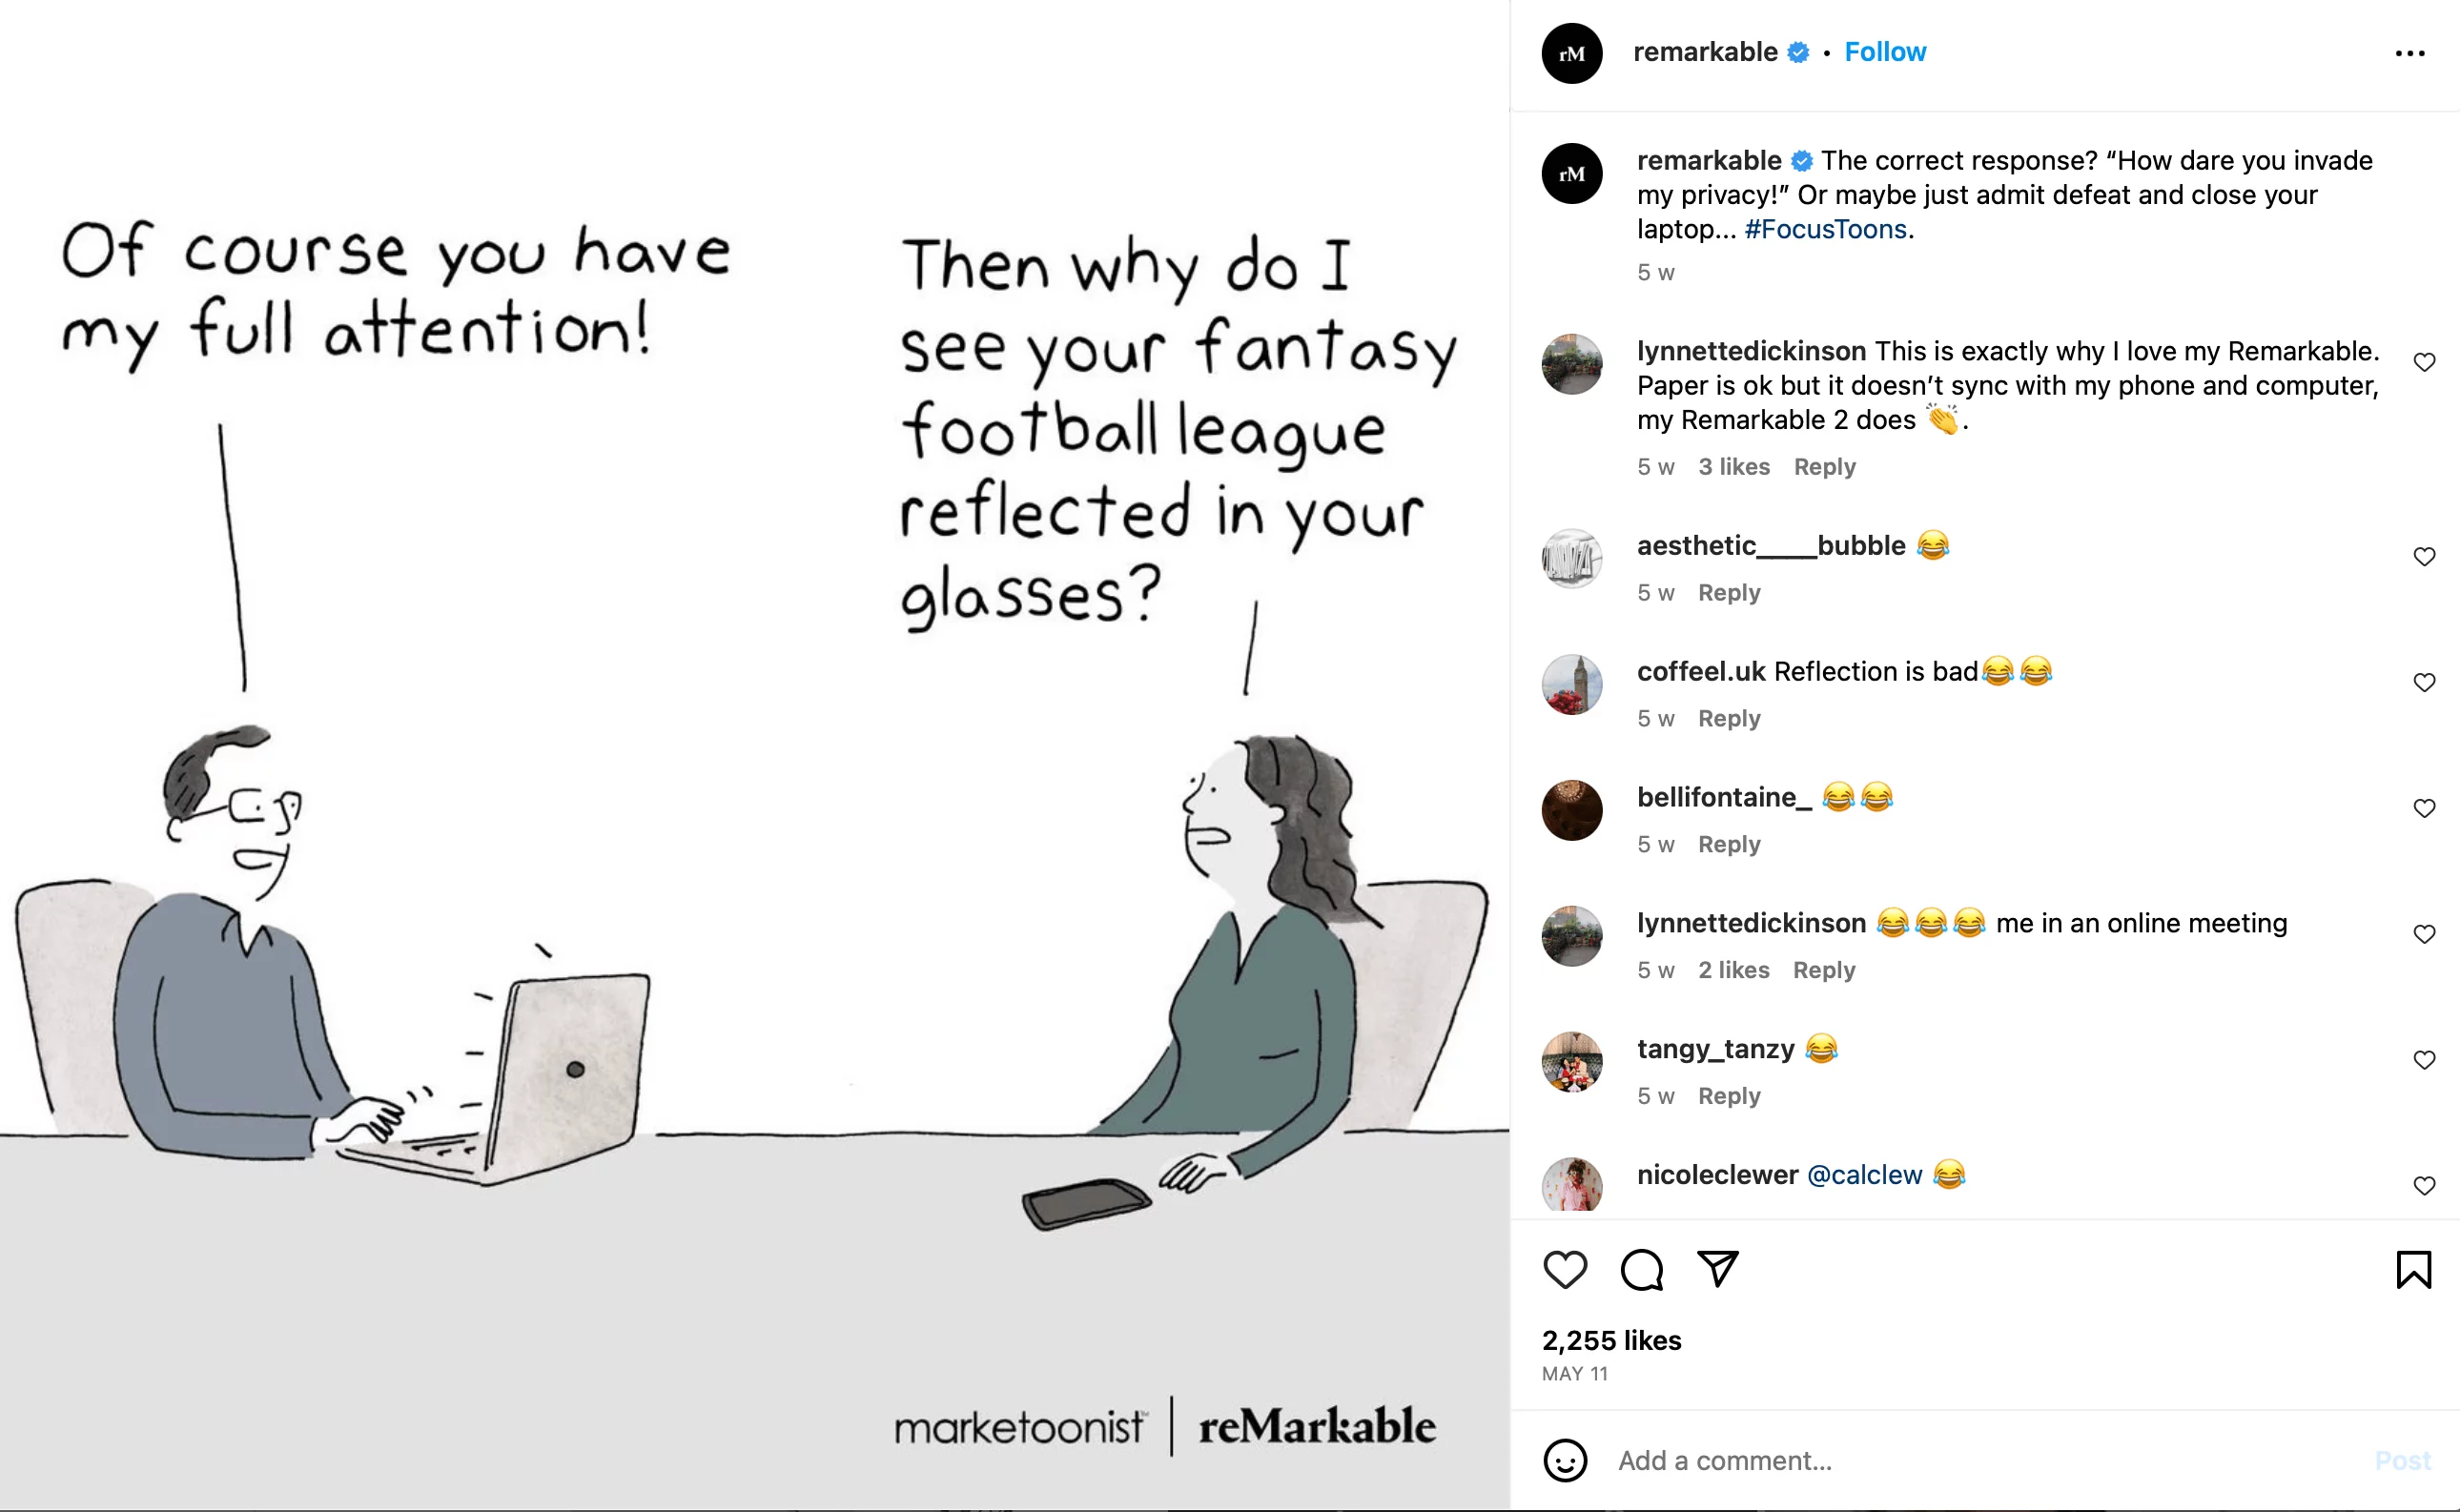 Cartoon drawing featured on @remarkable Instagram account showing with people discussing over a table